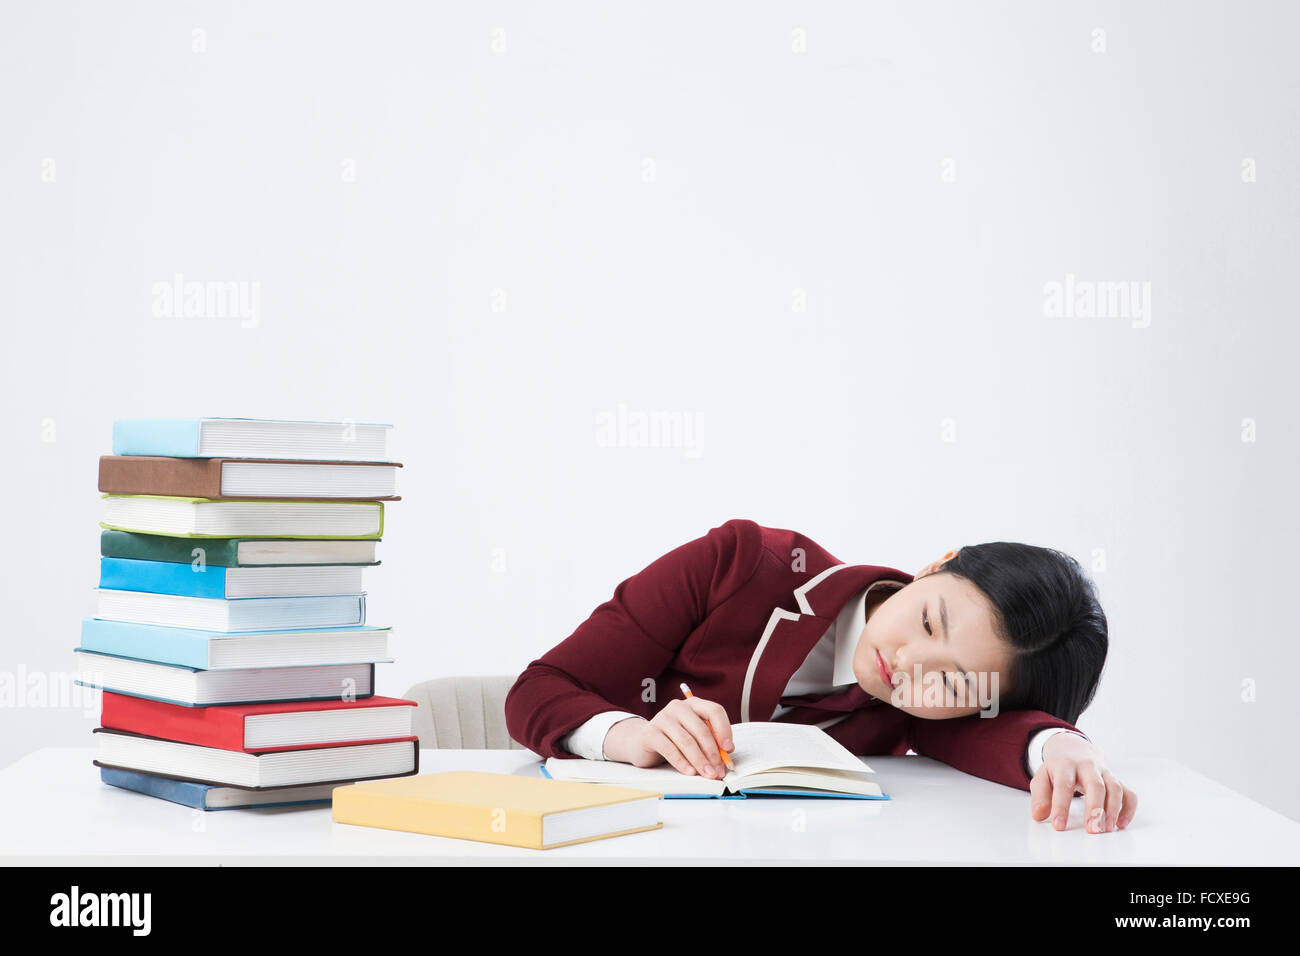 High school girl in school uniform putting her head on the desk with a pile of books on it in tiredness Stock Photo